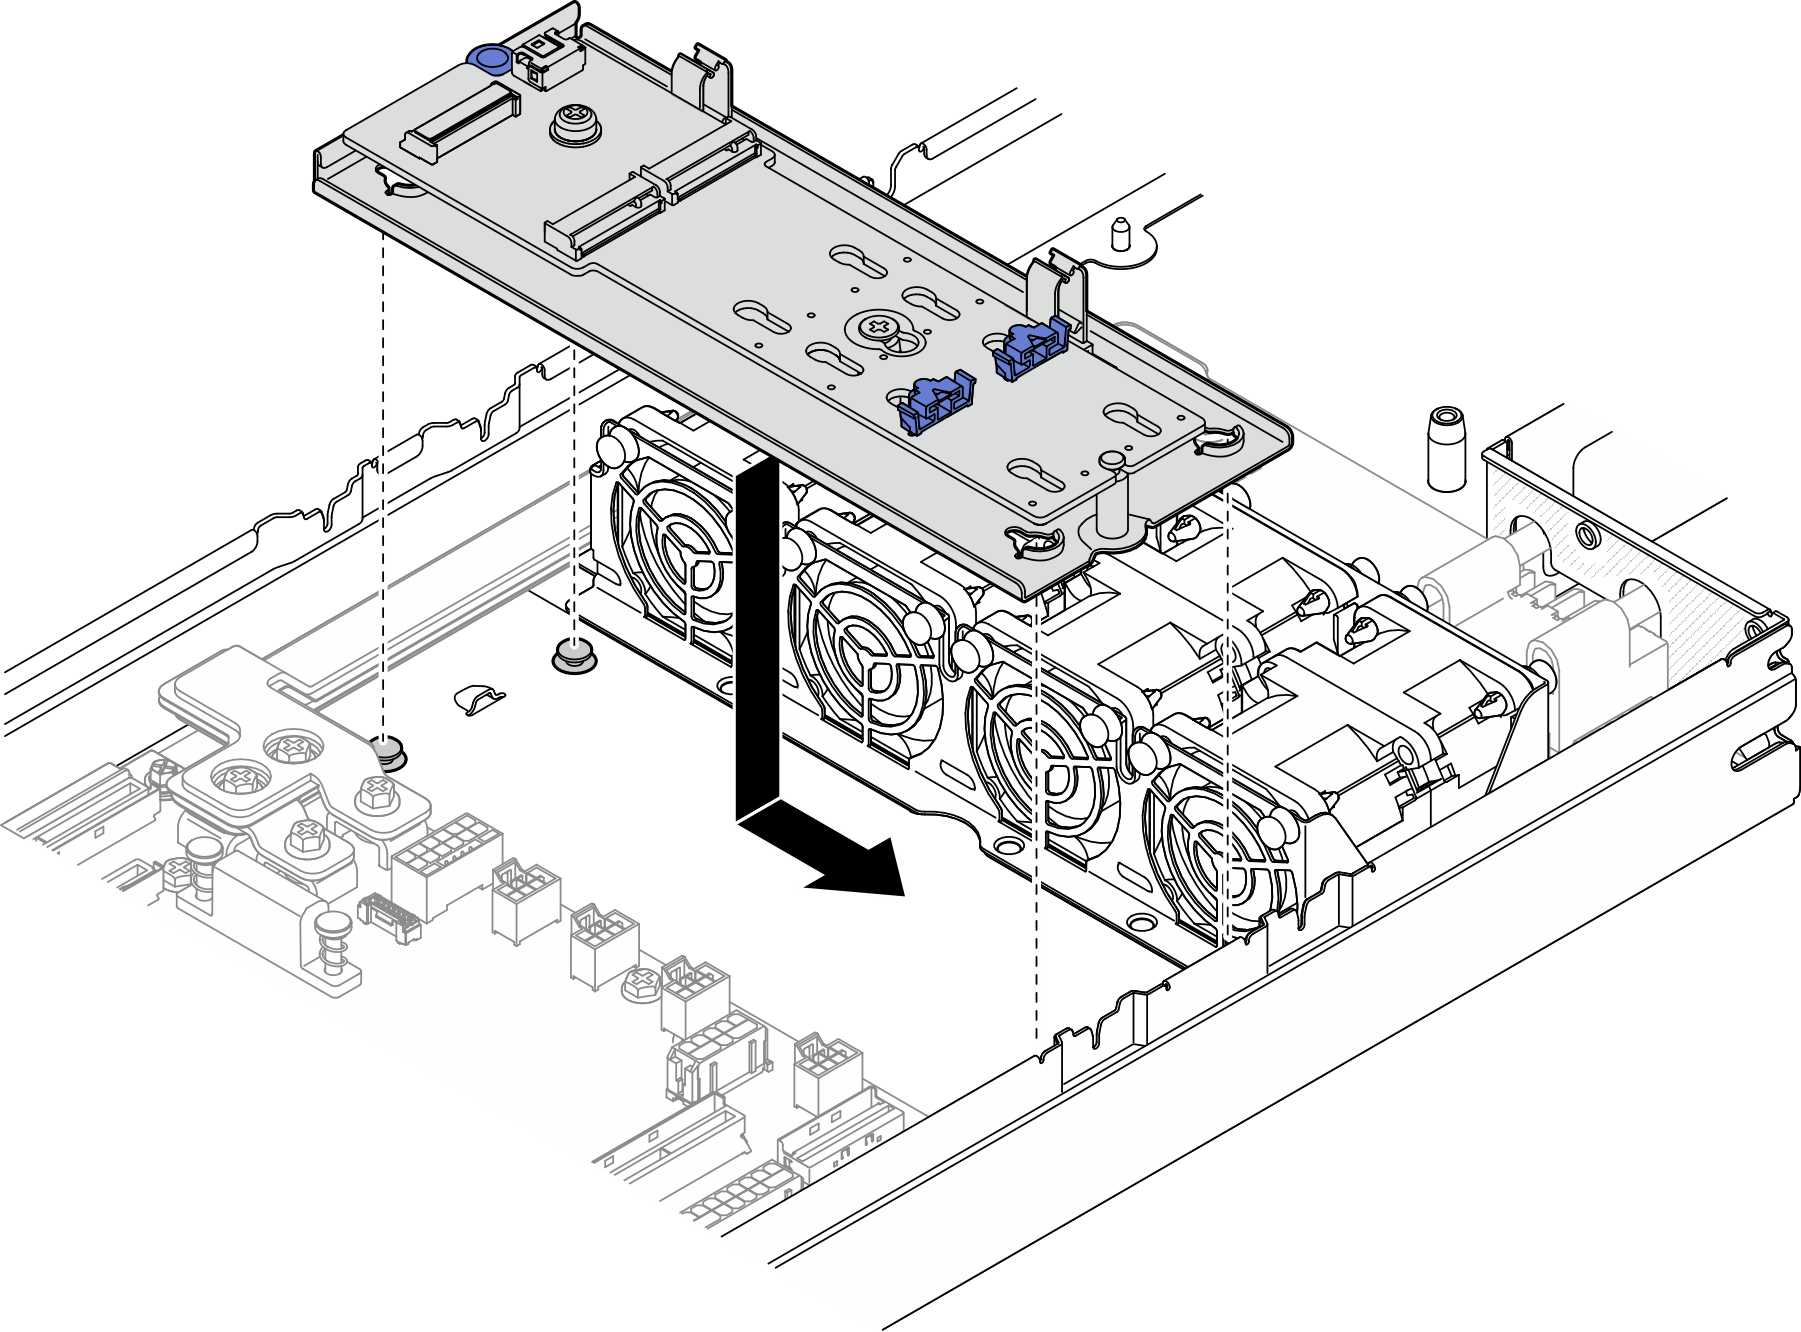 Installing M.2 boot adapter tray